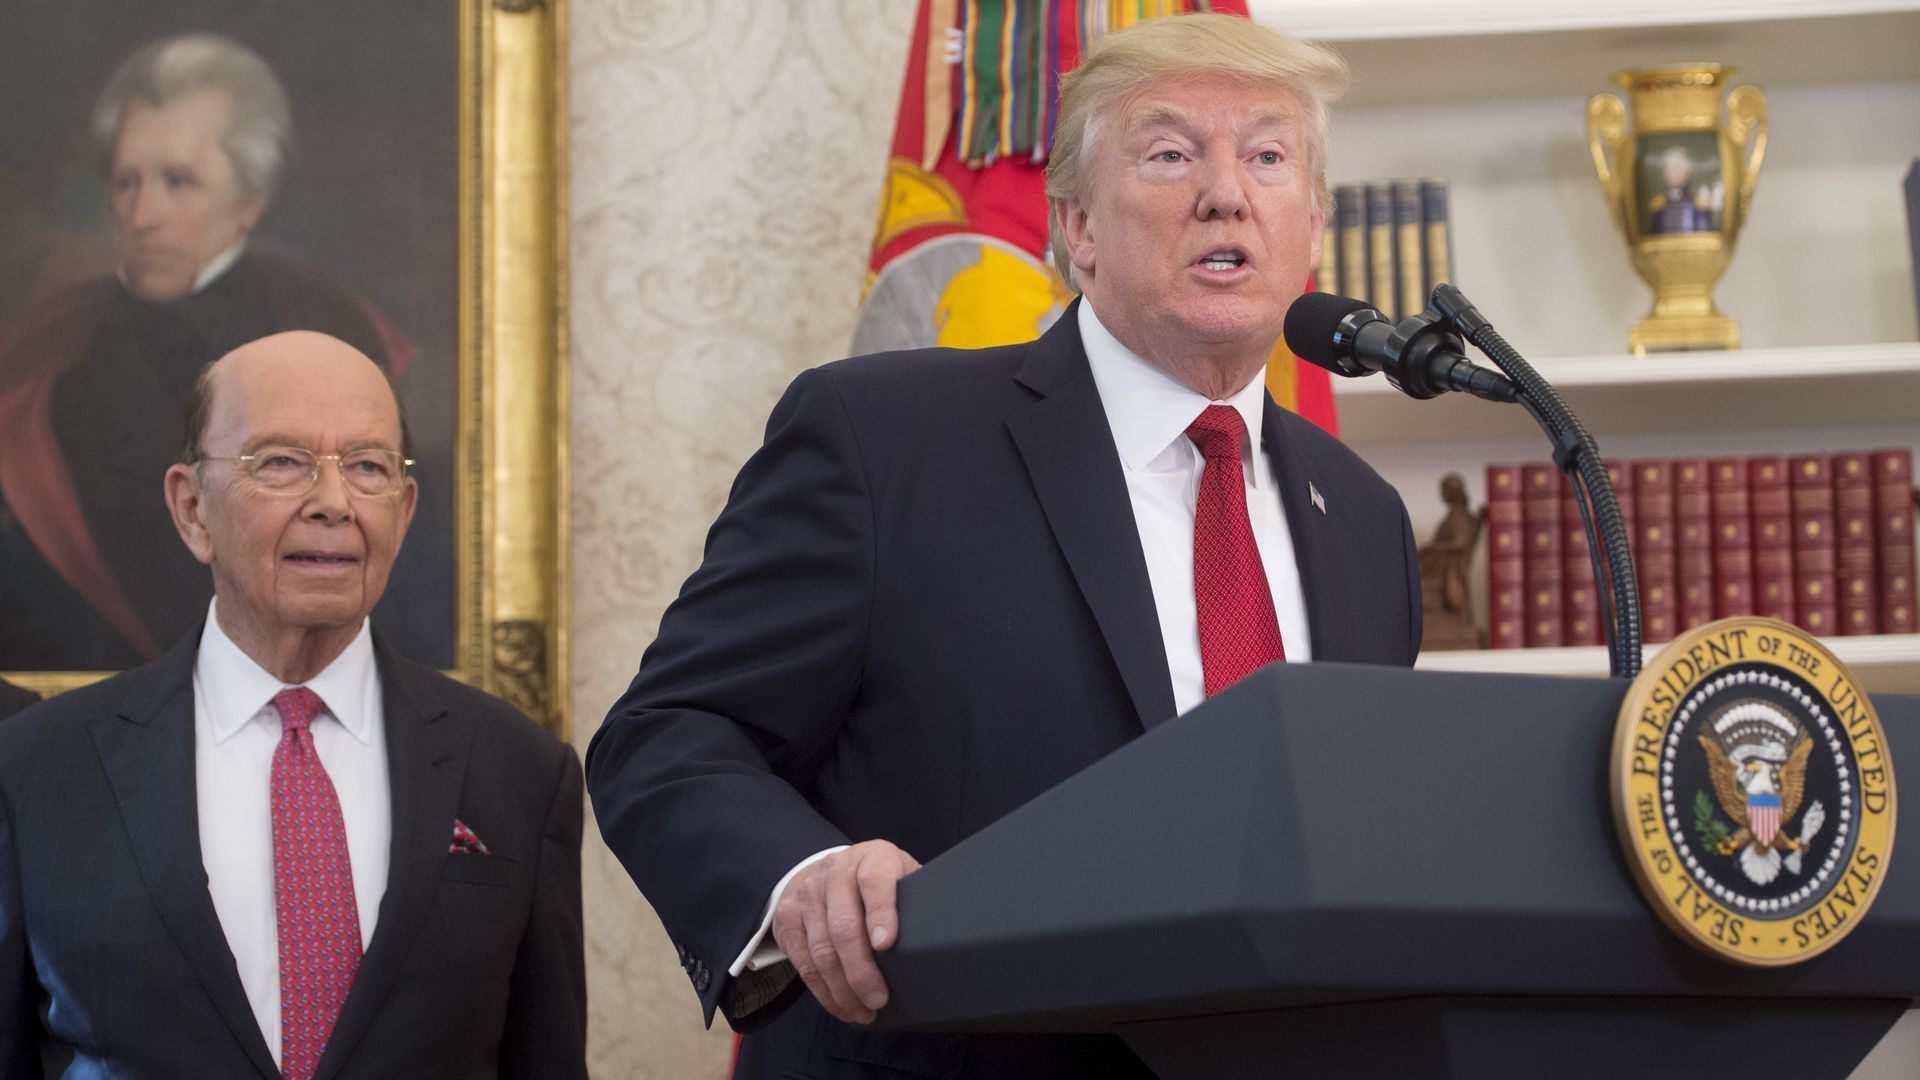 President Donald Trump and Commerce Secretary Wilbur Ross, who heads the Census Bureau. Photo: Saul Loeb/AFP/Getty Images